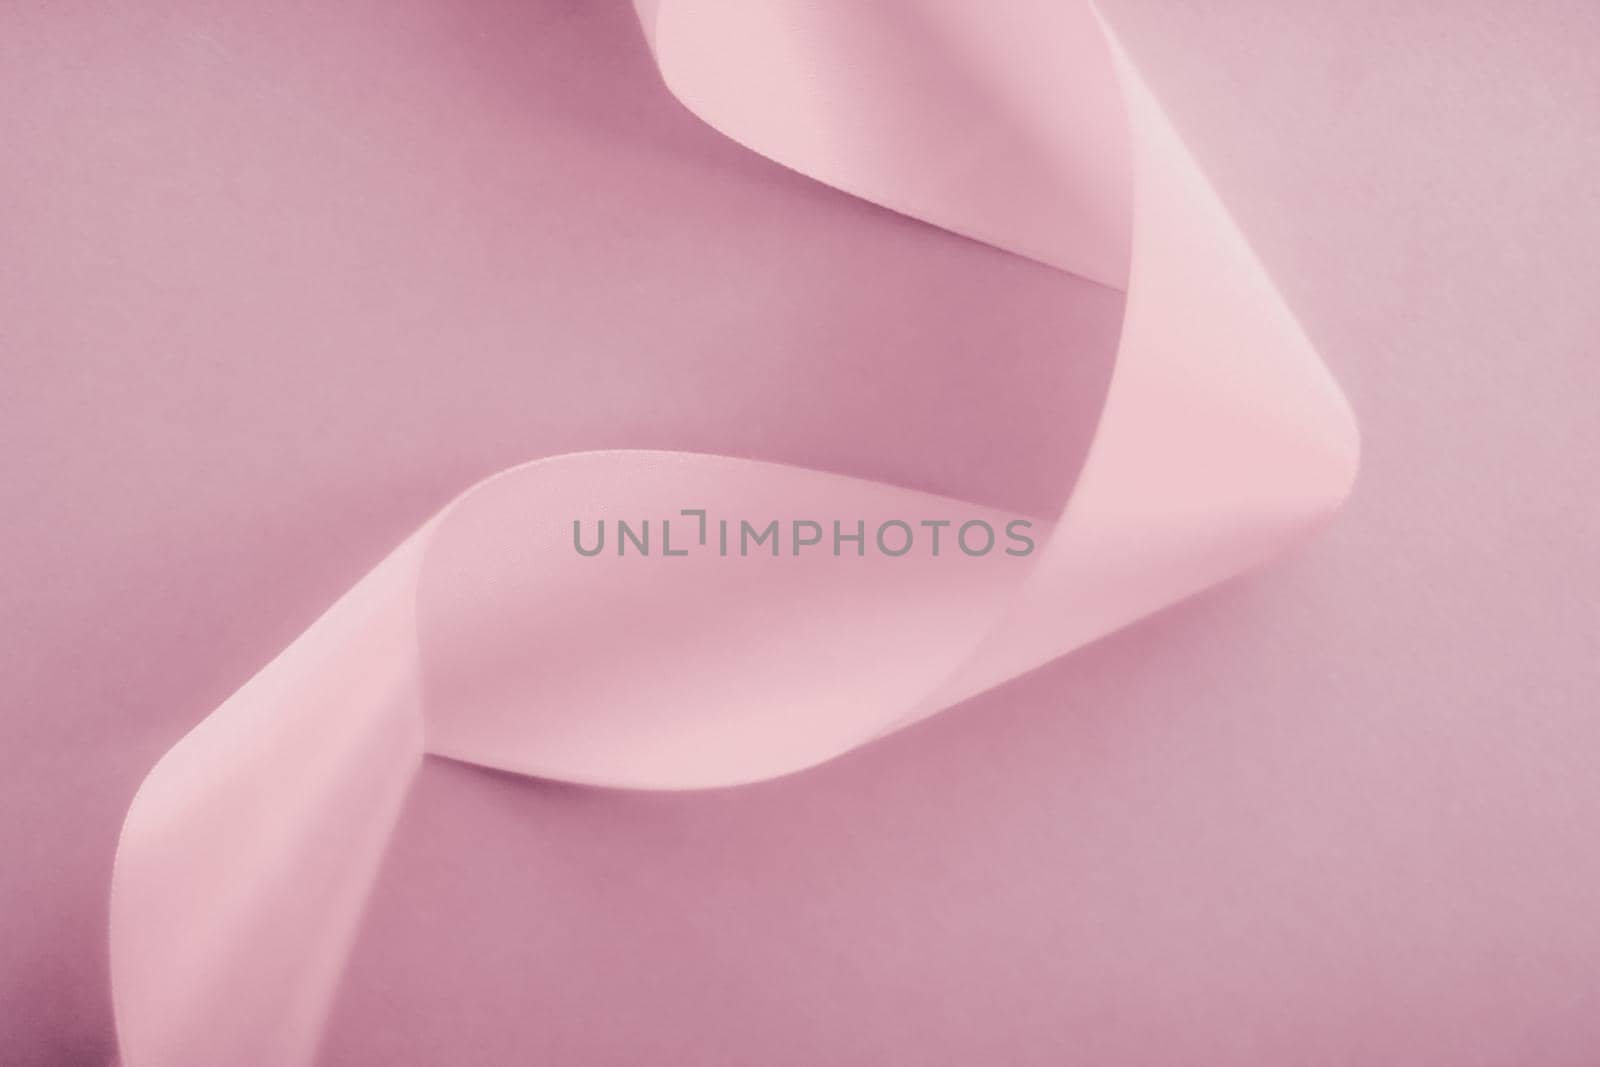 Abstract silk ribbon on blush pink background, exclusive luxury brand design for holiday sale product promotion and glamour art invitation card backdrop by Anneleven